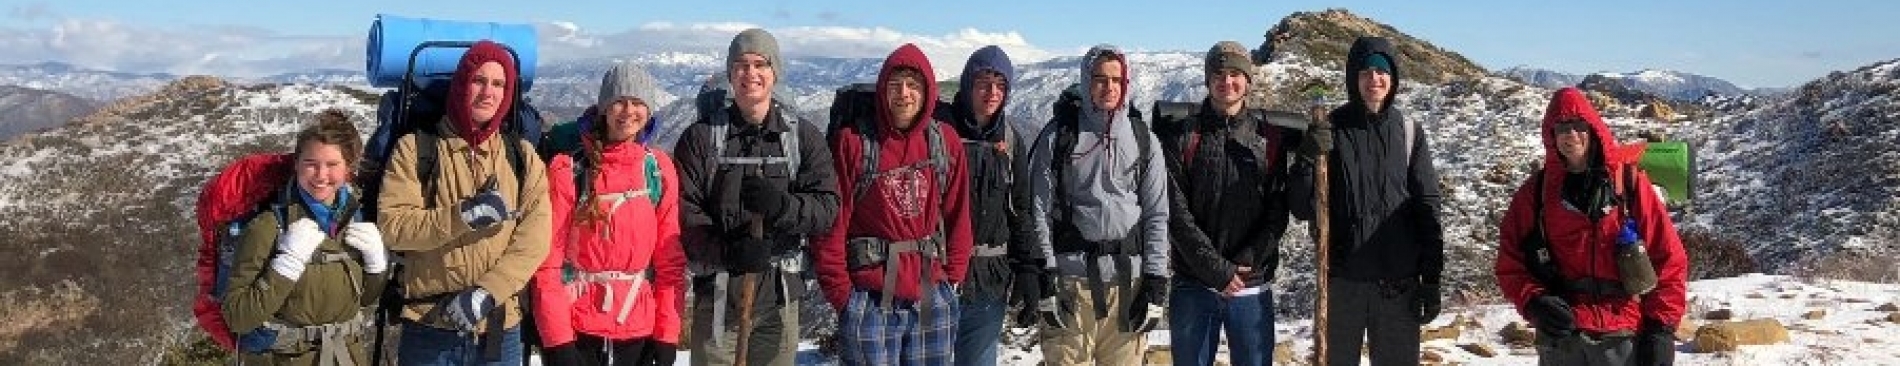 Slideshow: Fr. Paul Leads Freshmen on Backpacking Trip to To